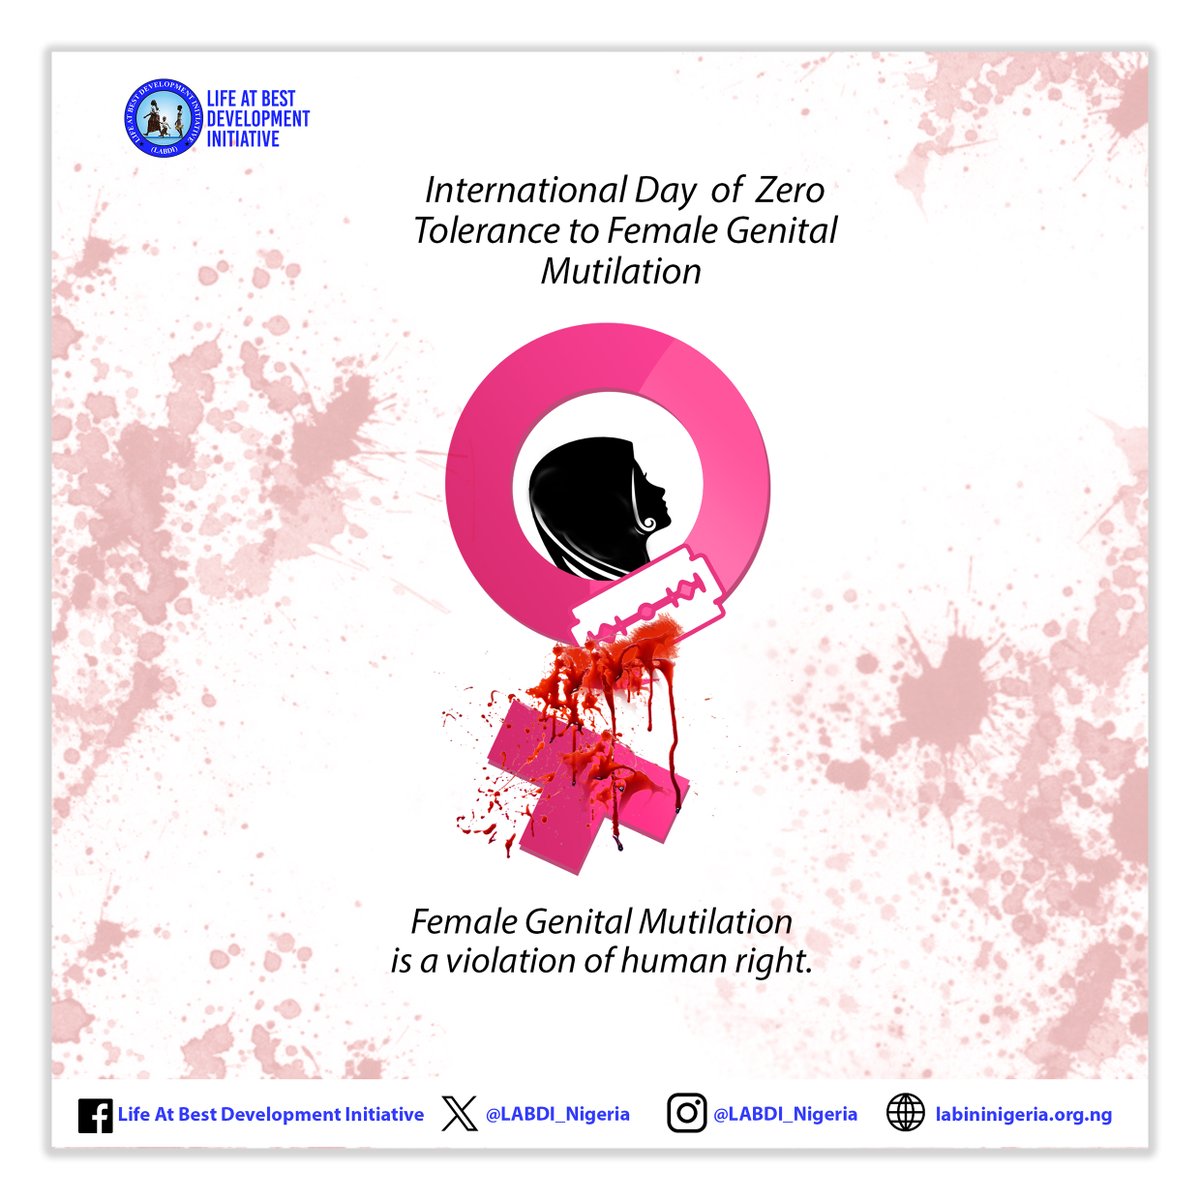 Let's stand united against the harmful practice of Female Genital Mutilation (FGM). Every girl deserves the right to grow up free from harm. Say NO to FGM and join the global movement to protect the rights and well-being of girls everywhere. #EndFGM #GirlsRights #HerVoiceMatters